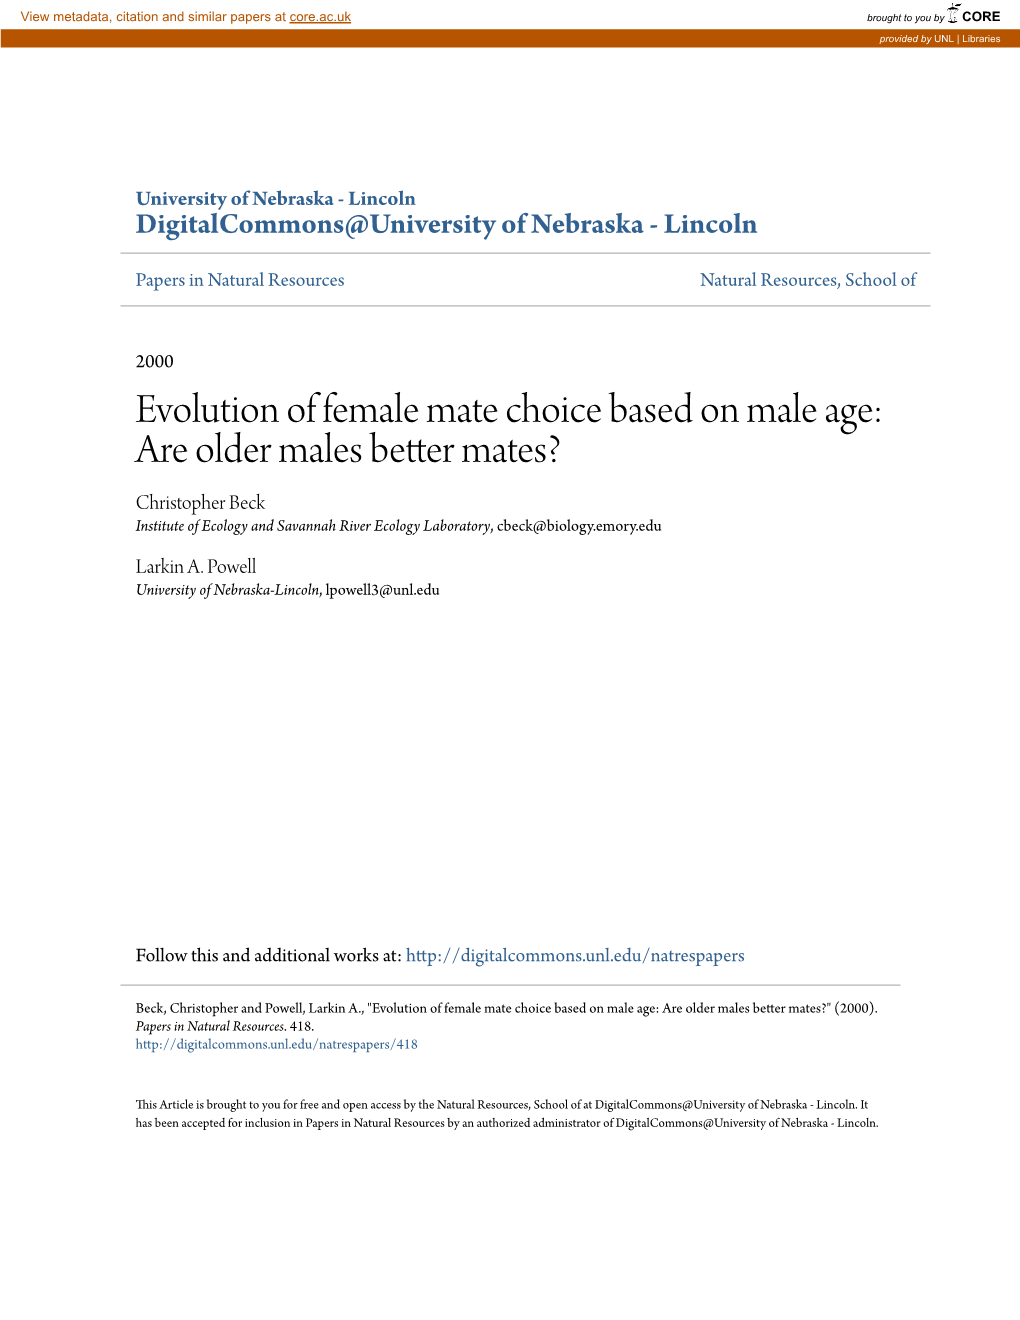 Evolution of Female Mate Choice Based on Male